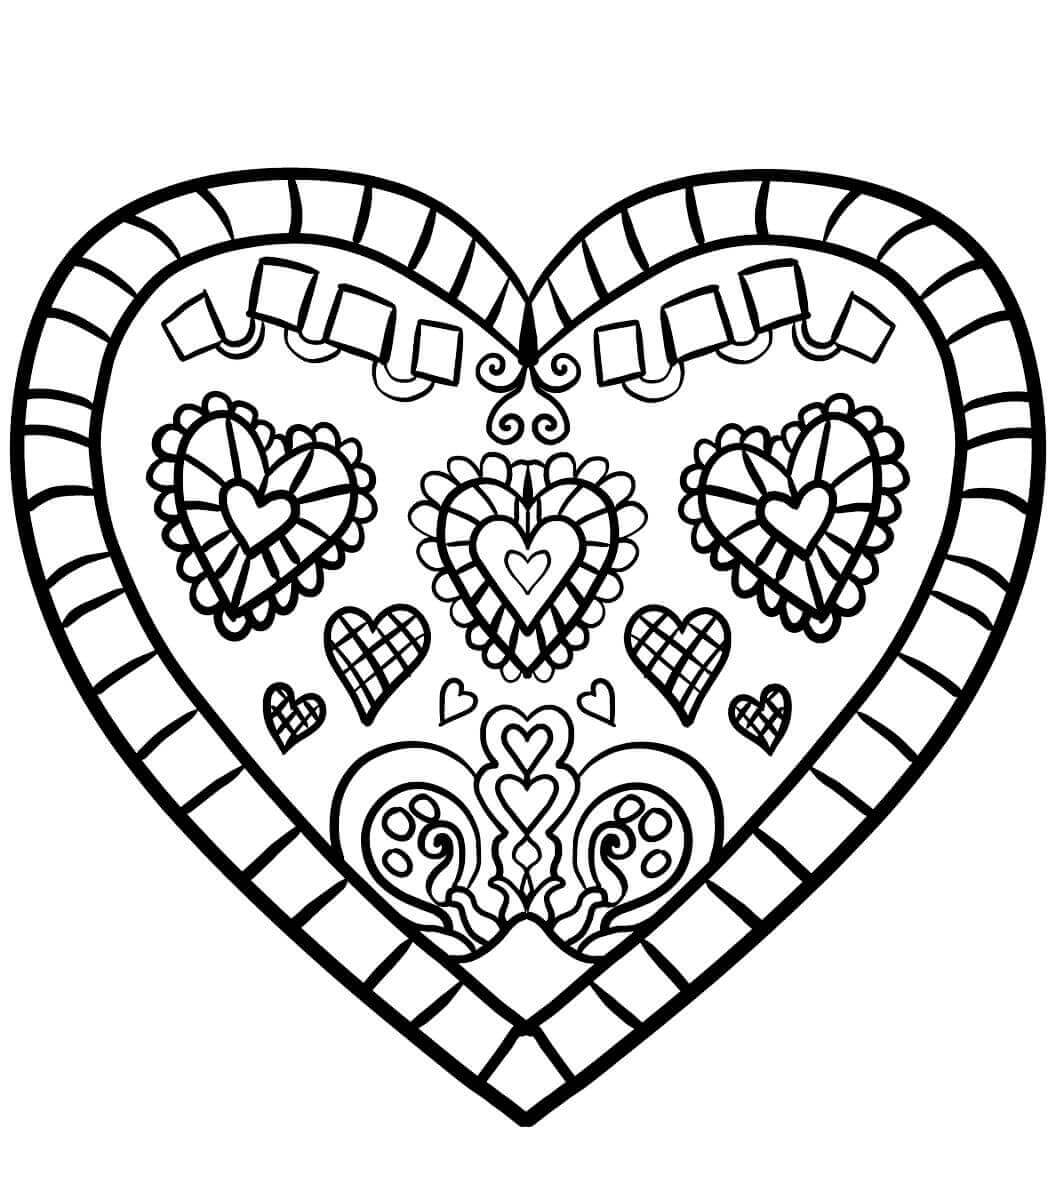 35-free-printable-heart-coloring-pages